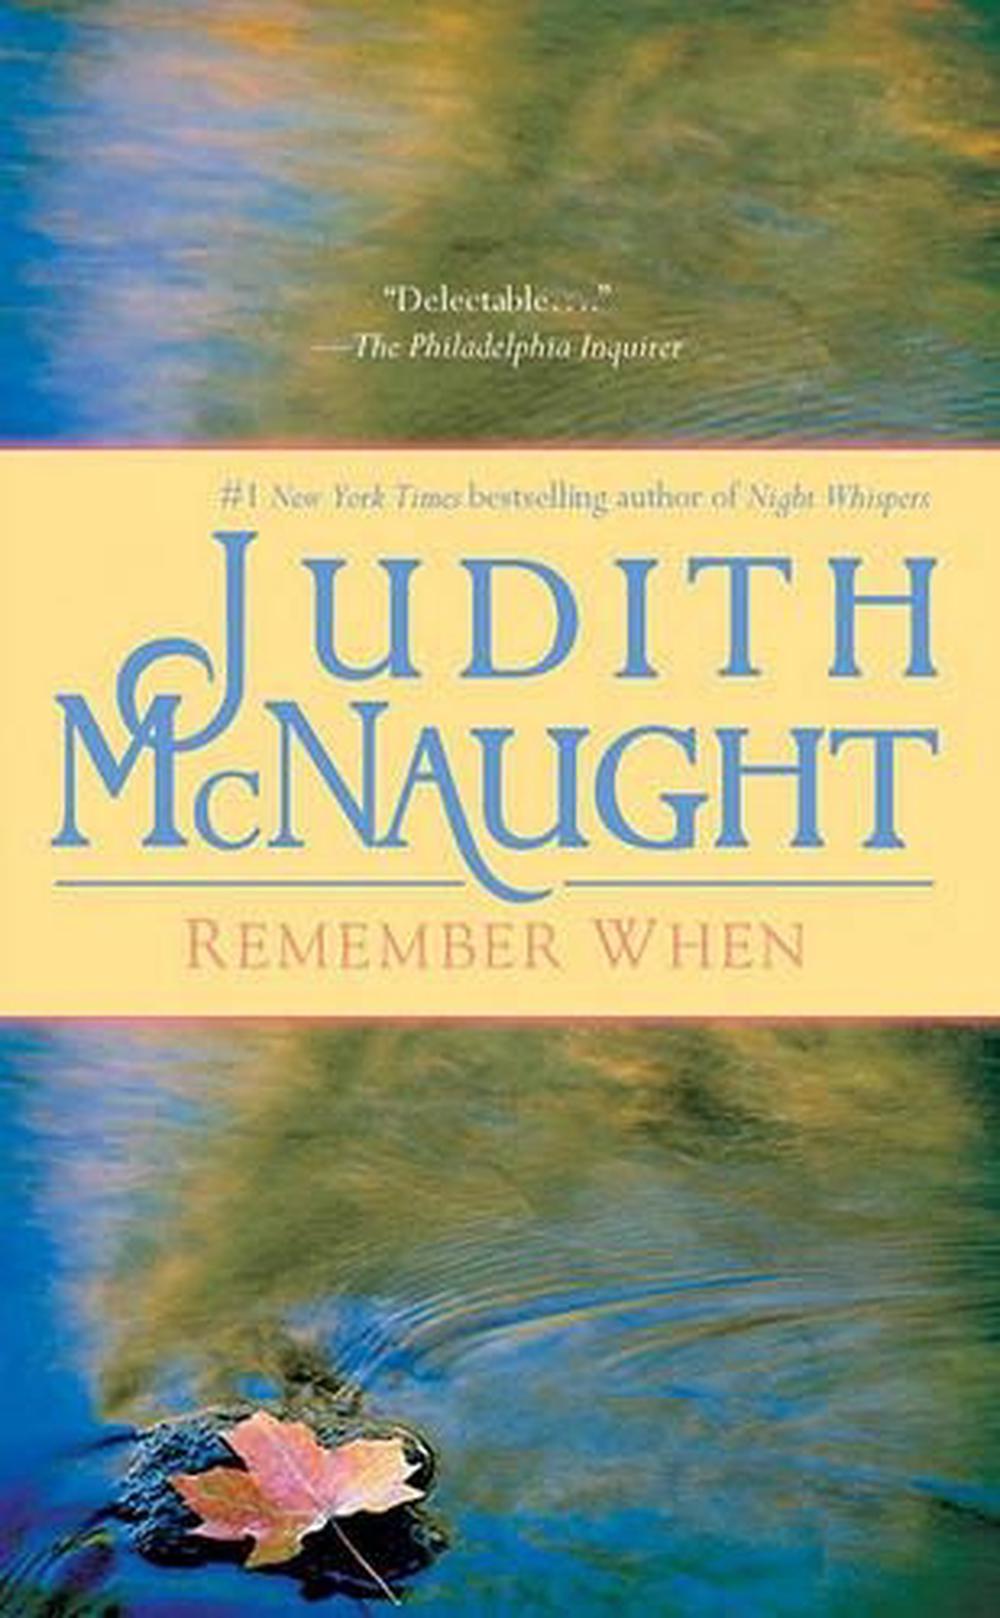 until you book judith mcnaught